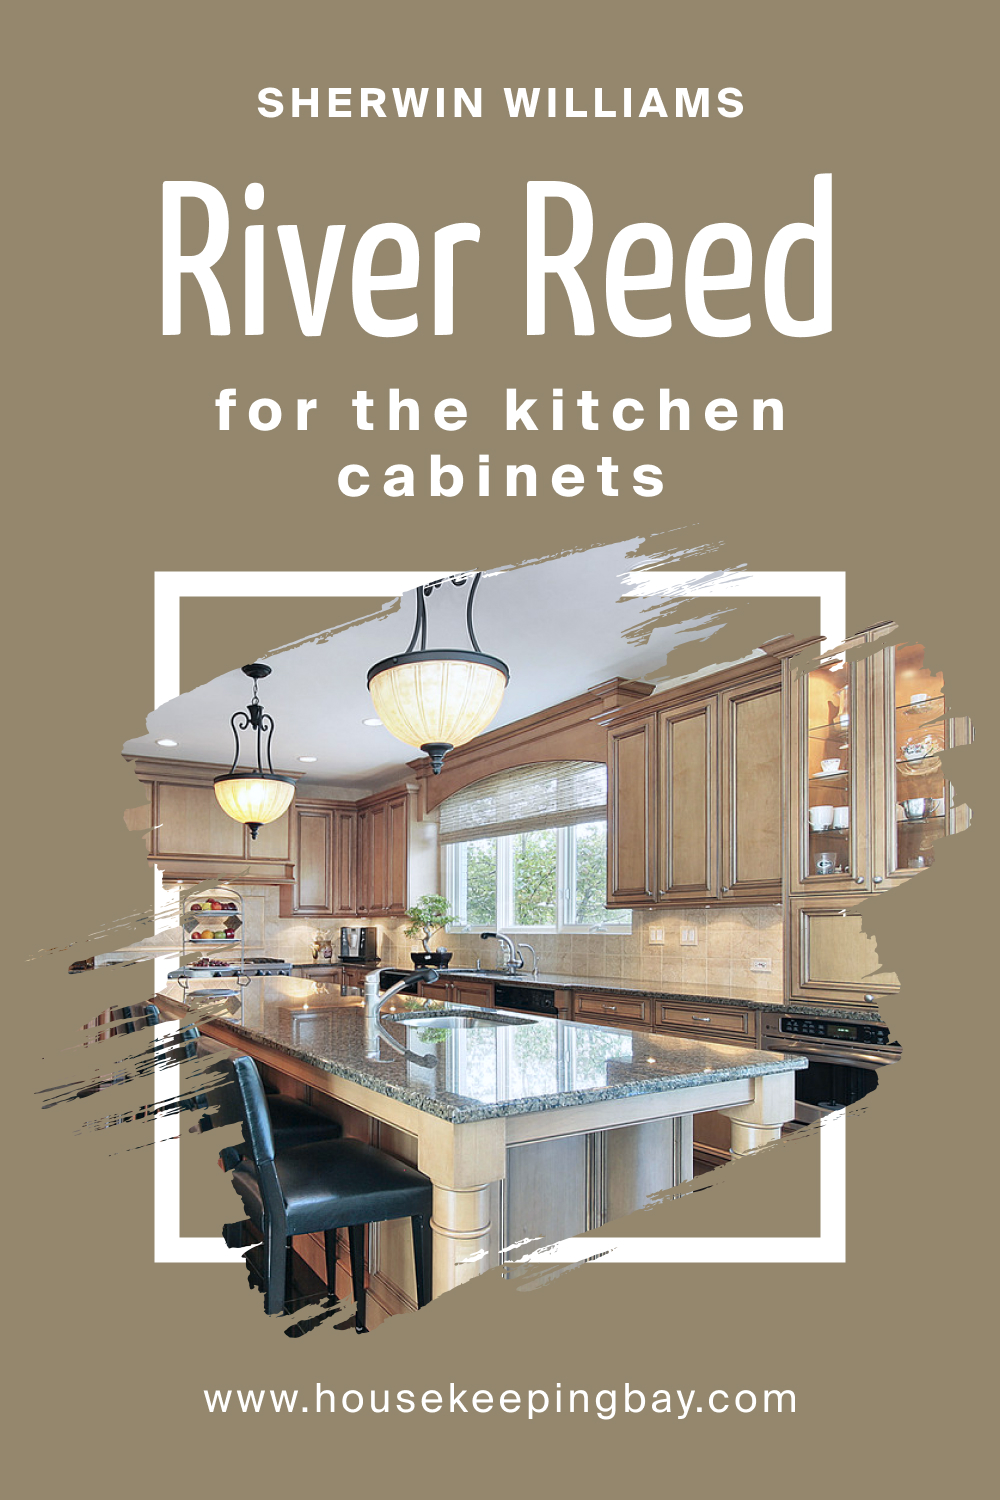 Sherwin Williams. SW 9534 River Reed For the Kitchen Cabinets